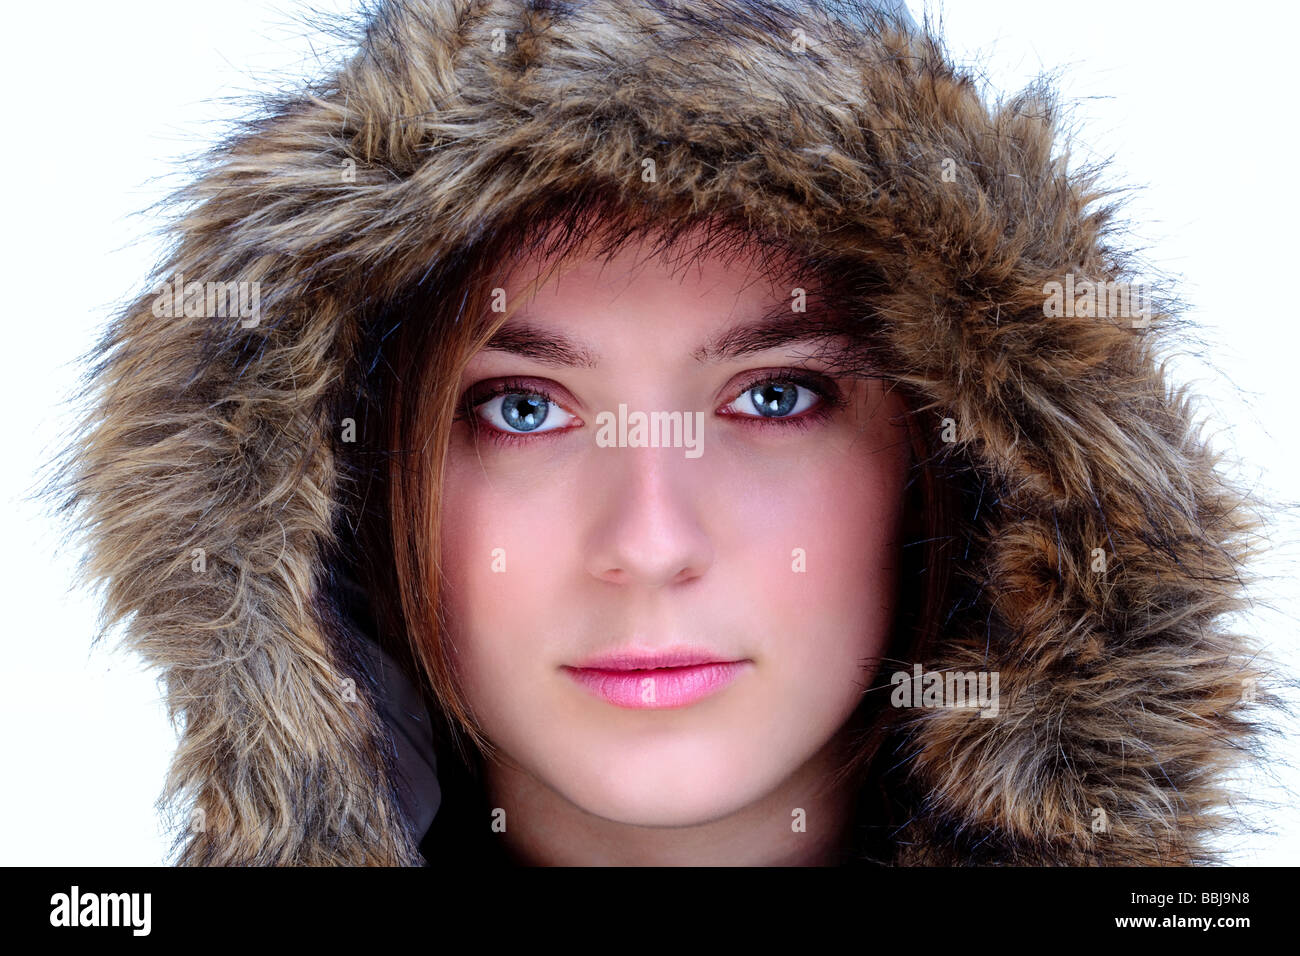 A woman wearing a fur hood looking at camera isolated on a white background Stock Photo